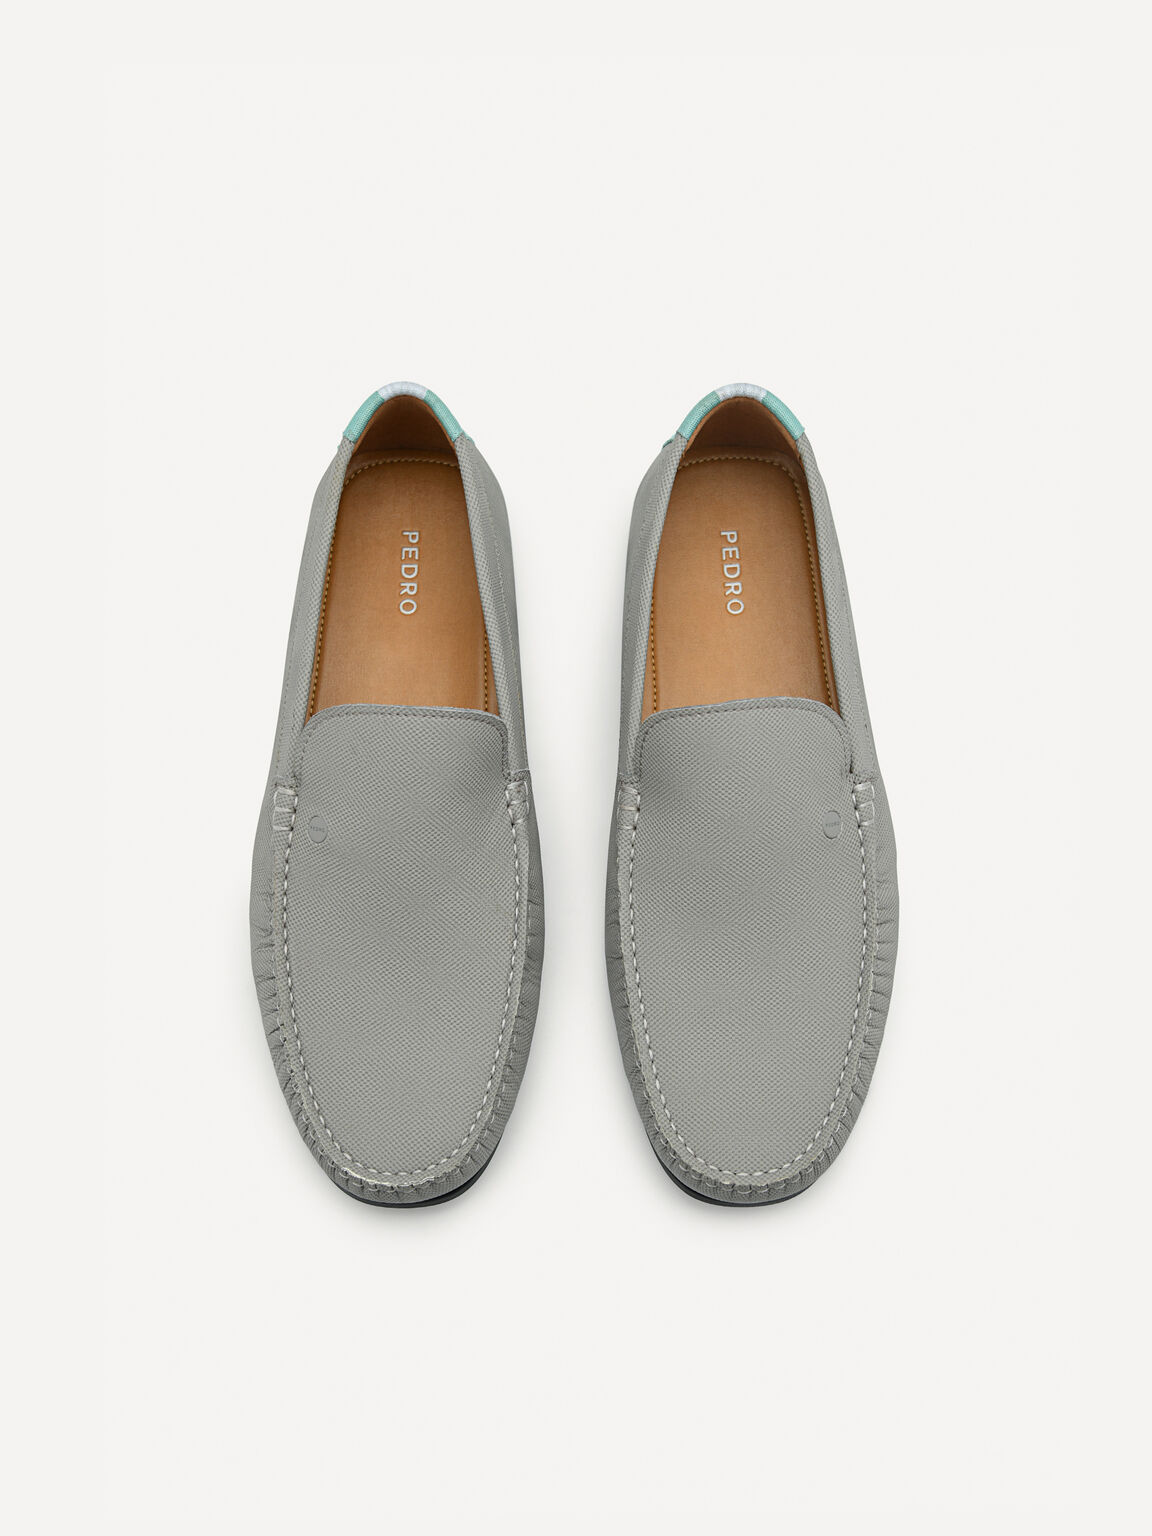 Leather & Fabric Slip-On Loafers, Grey